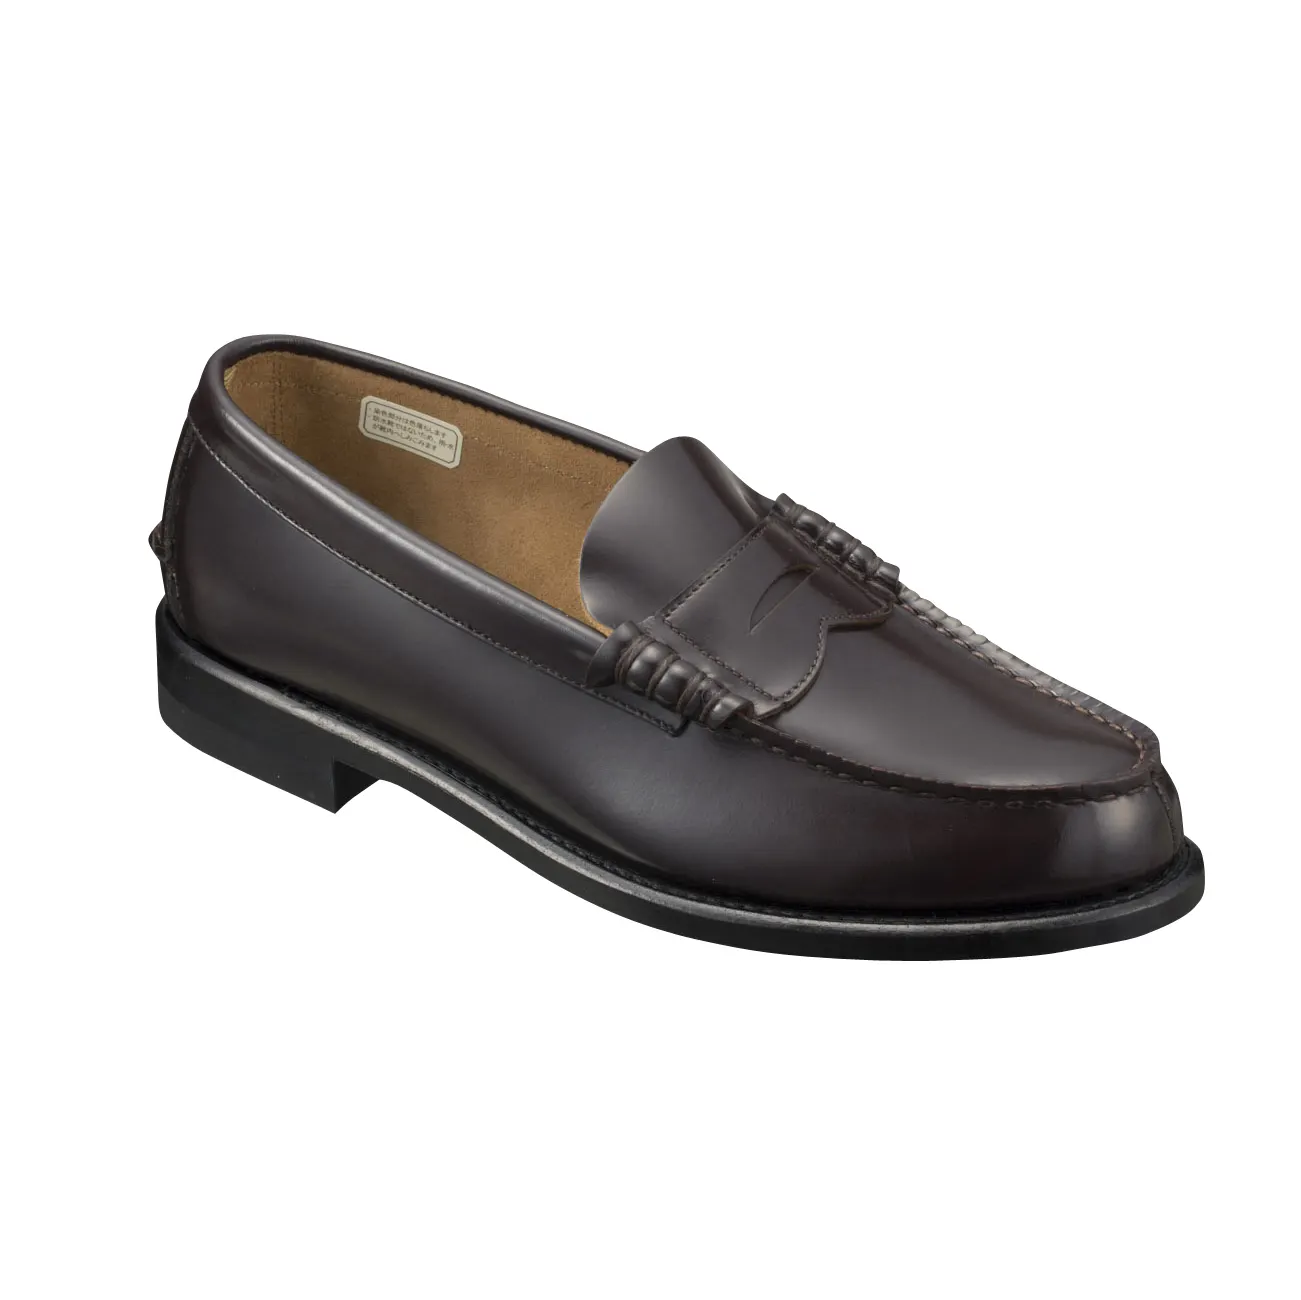 New high quality timeless minimalist design shoes men's loafers